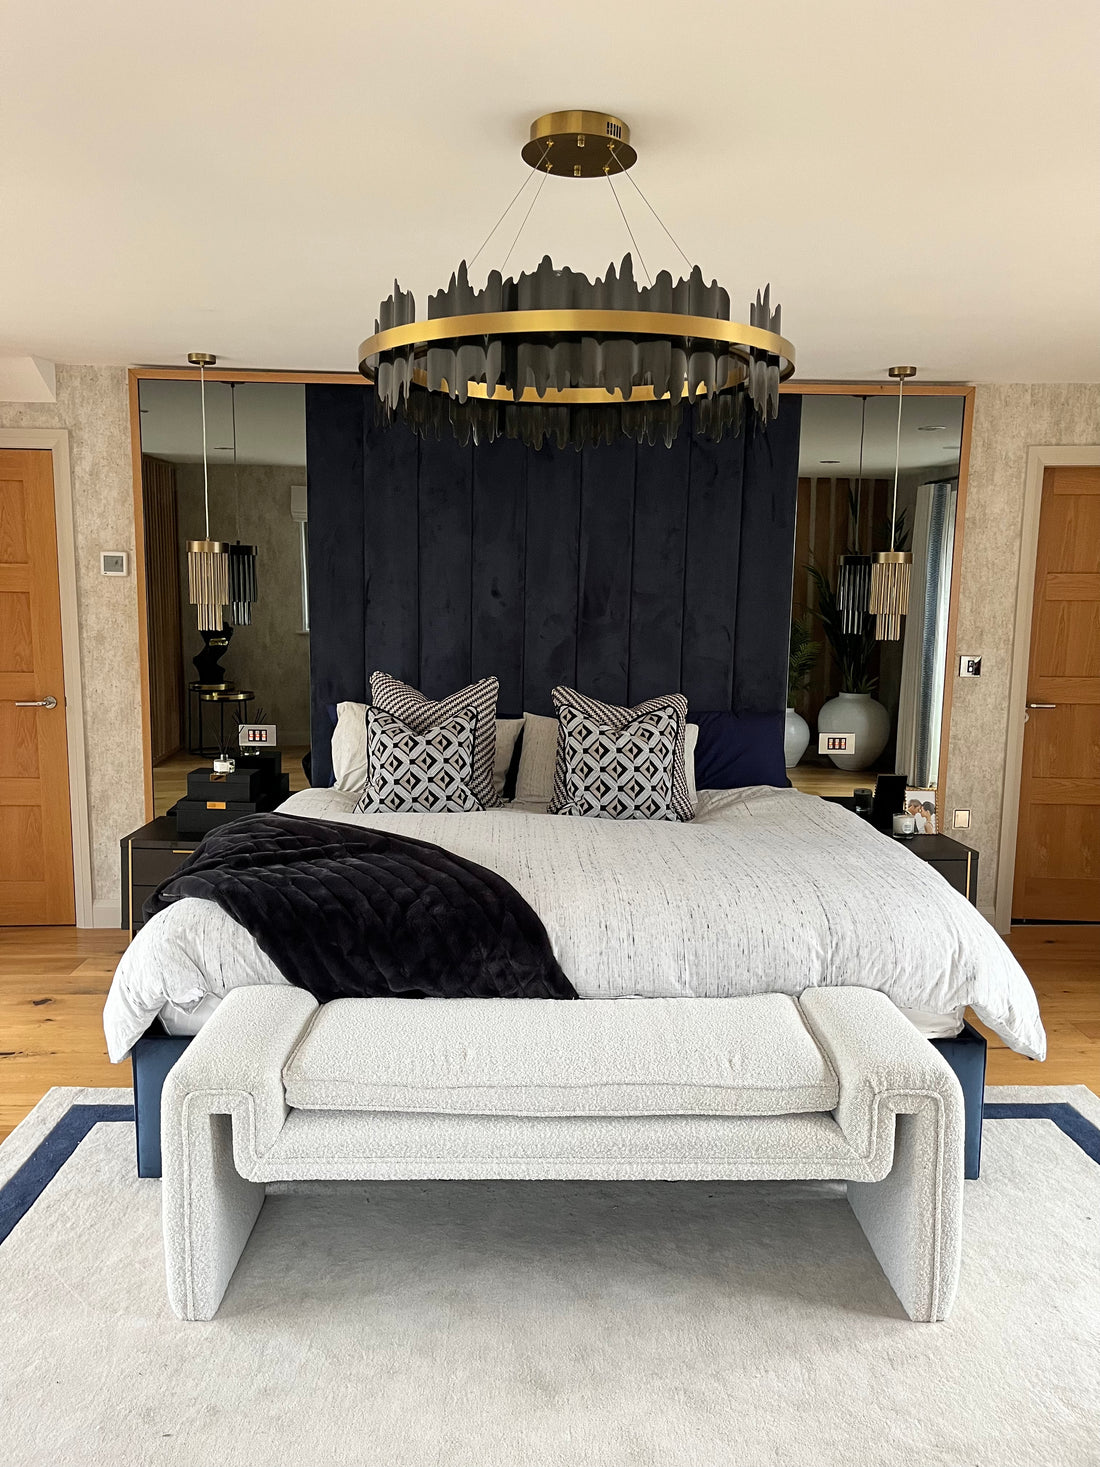 A Bedroom Fit For A King, Lancashire